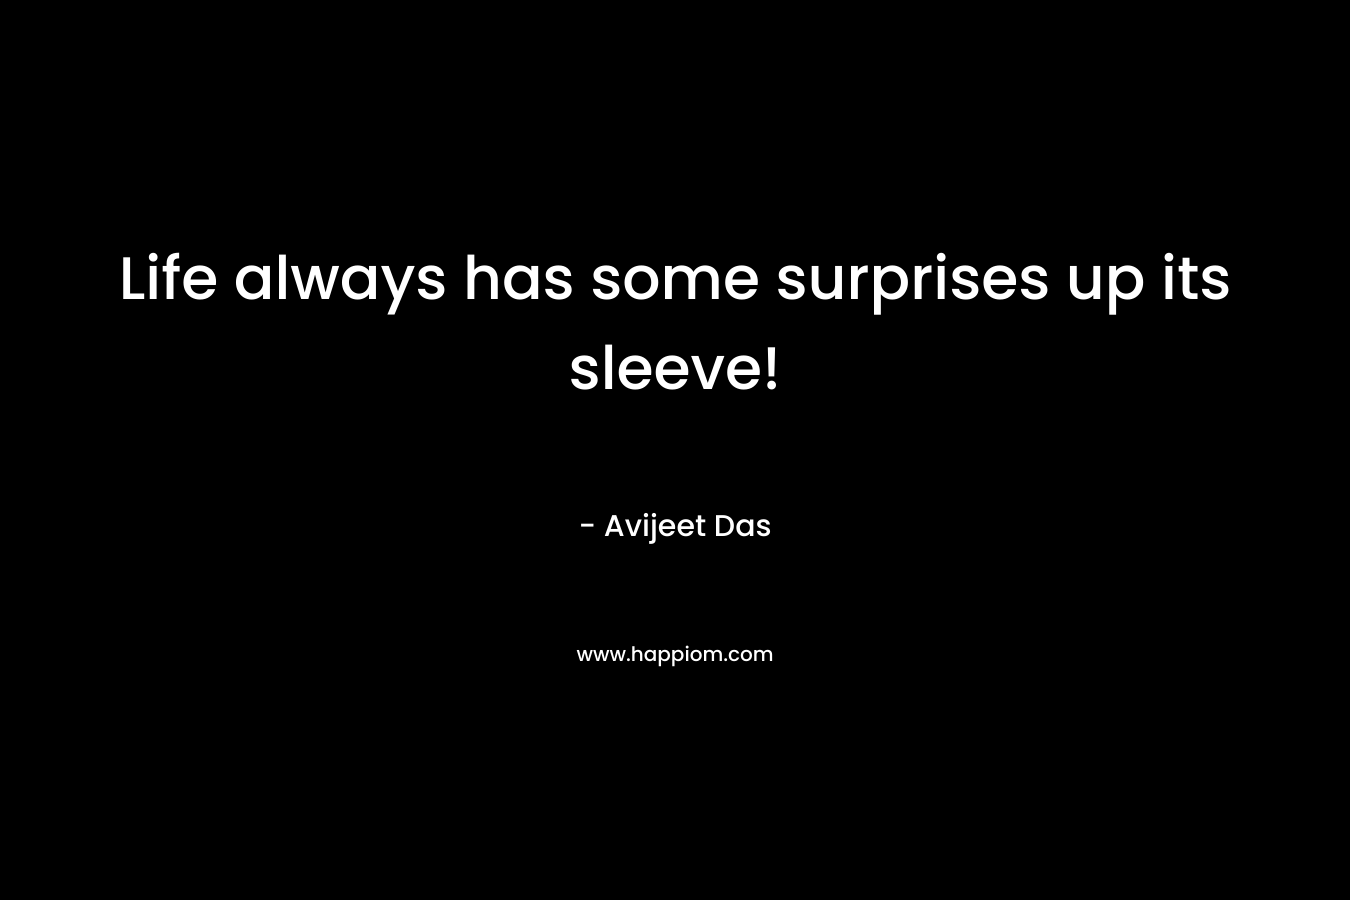 Life always has some surprises up its sleeve!